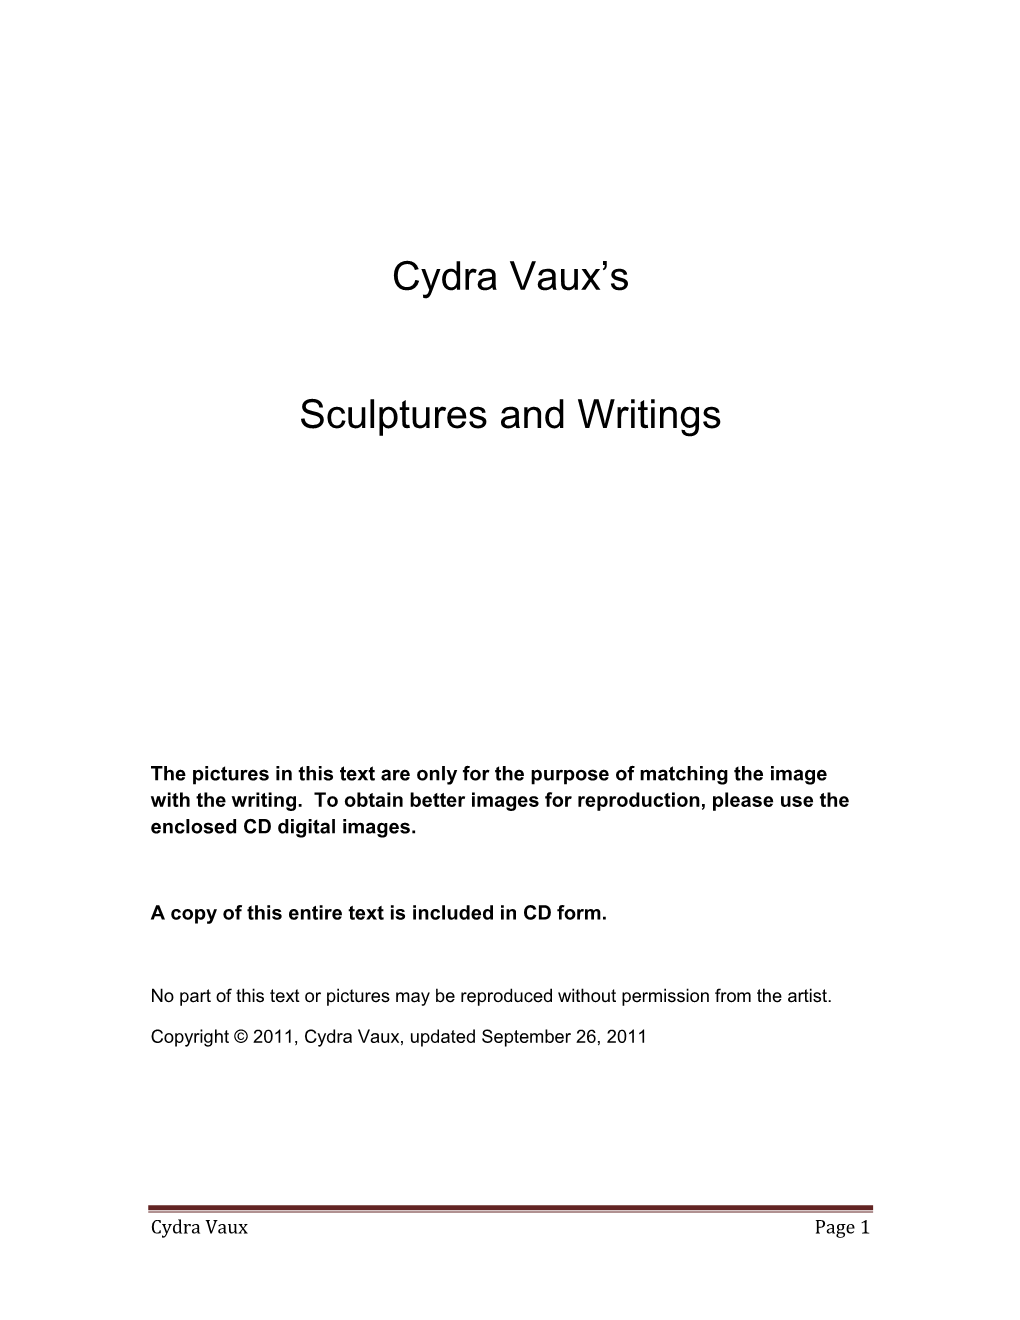 Complete Catalog of Cydra's Sculptures